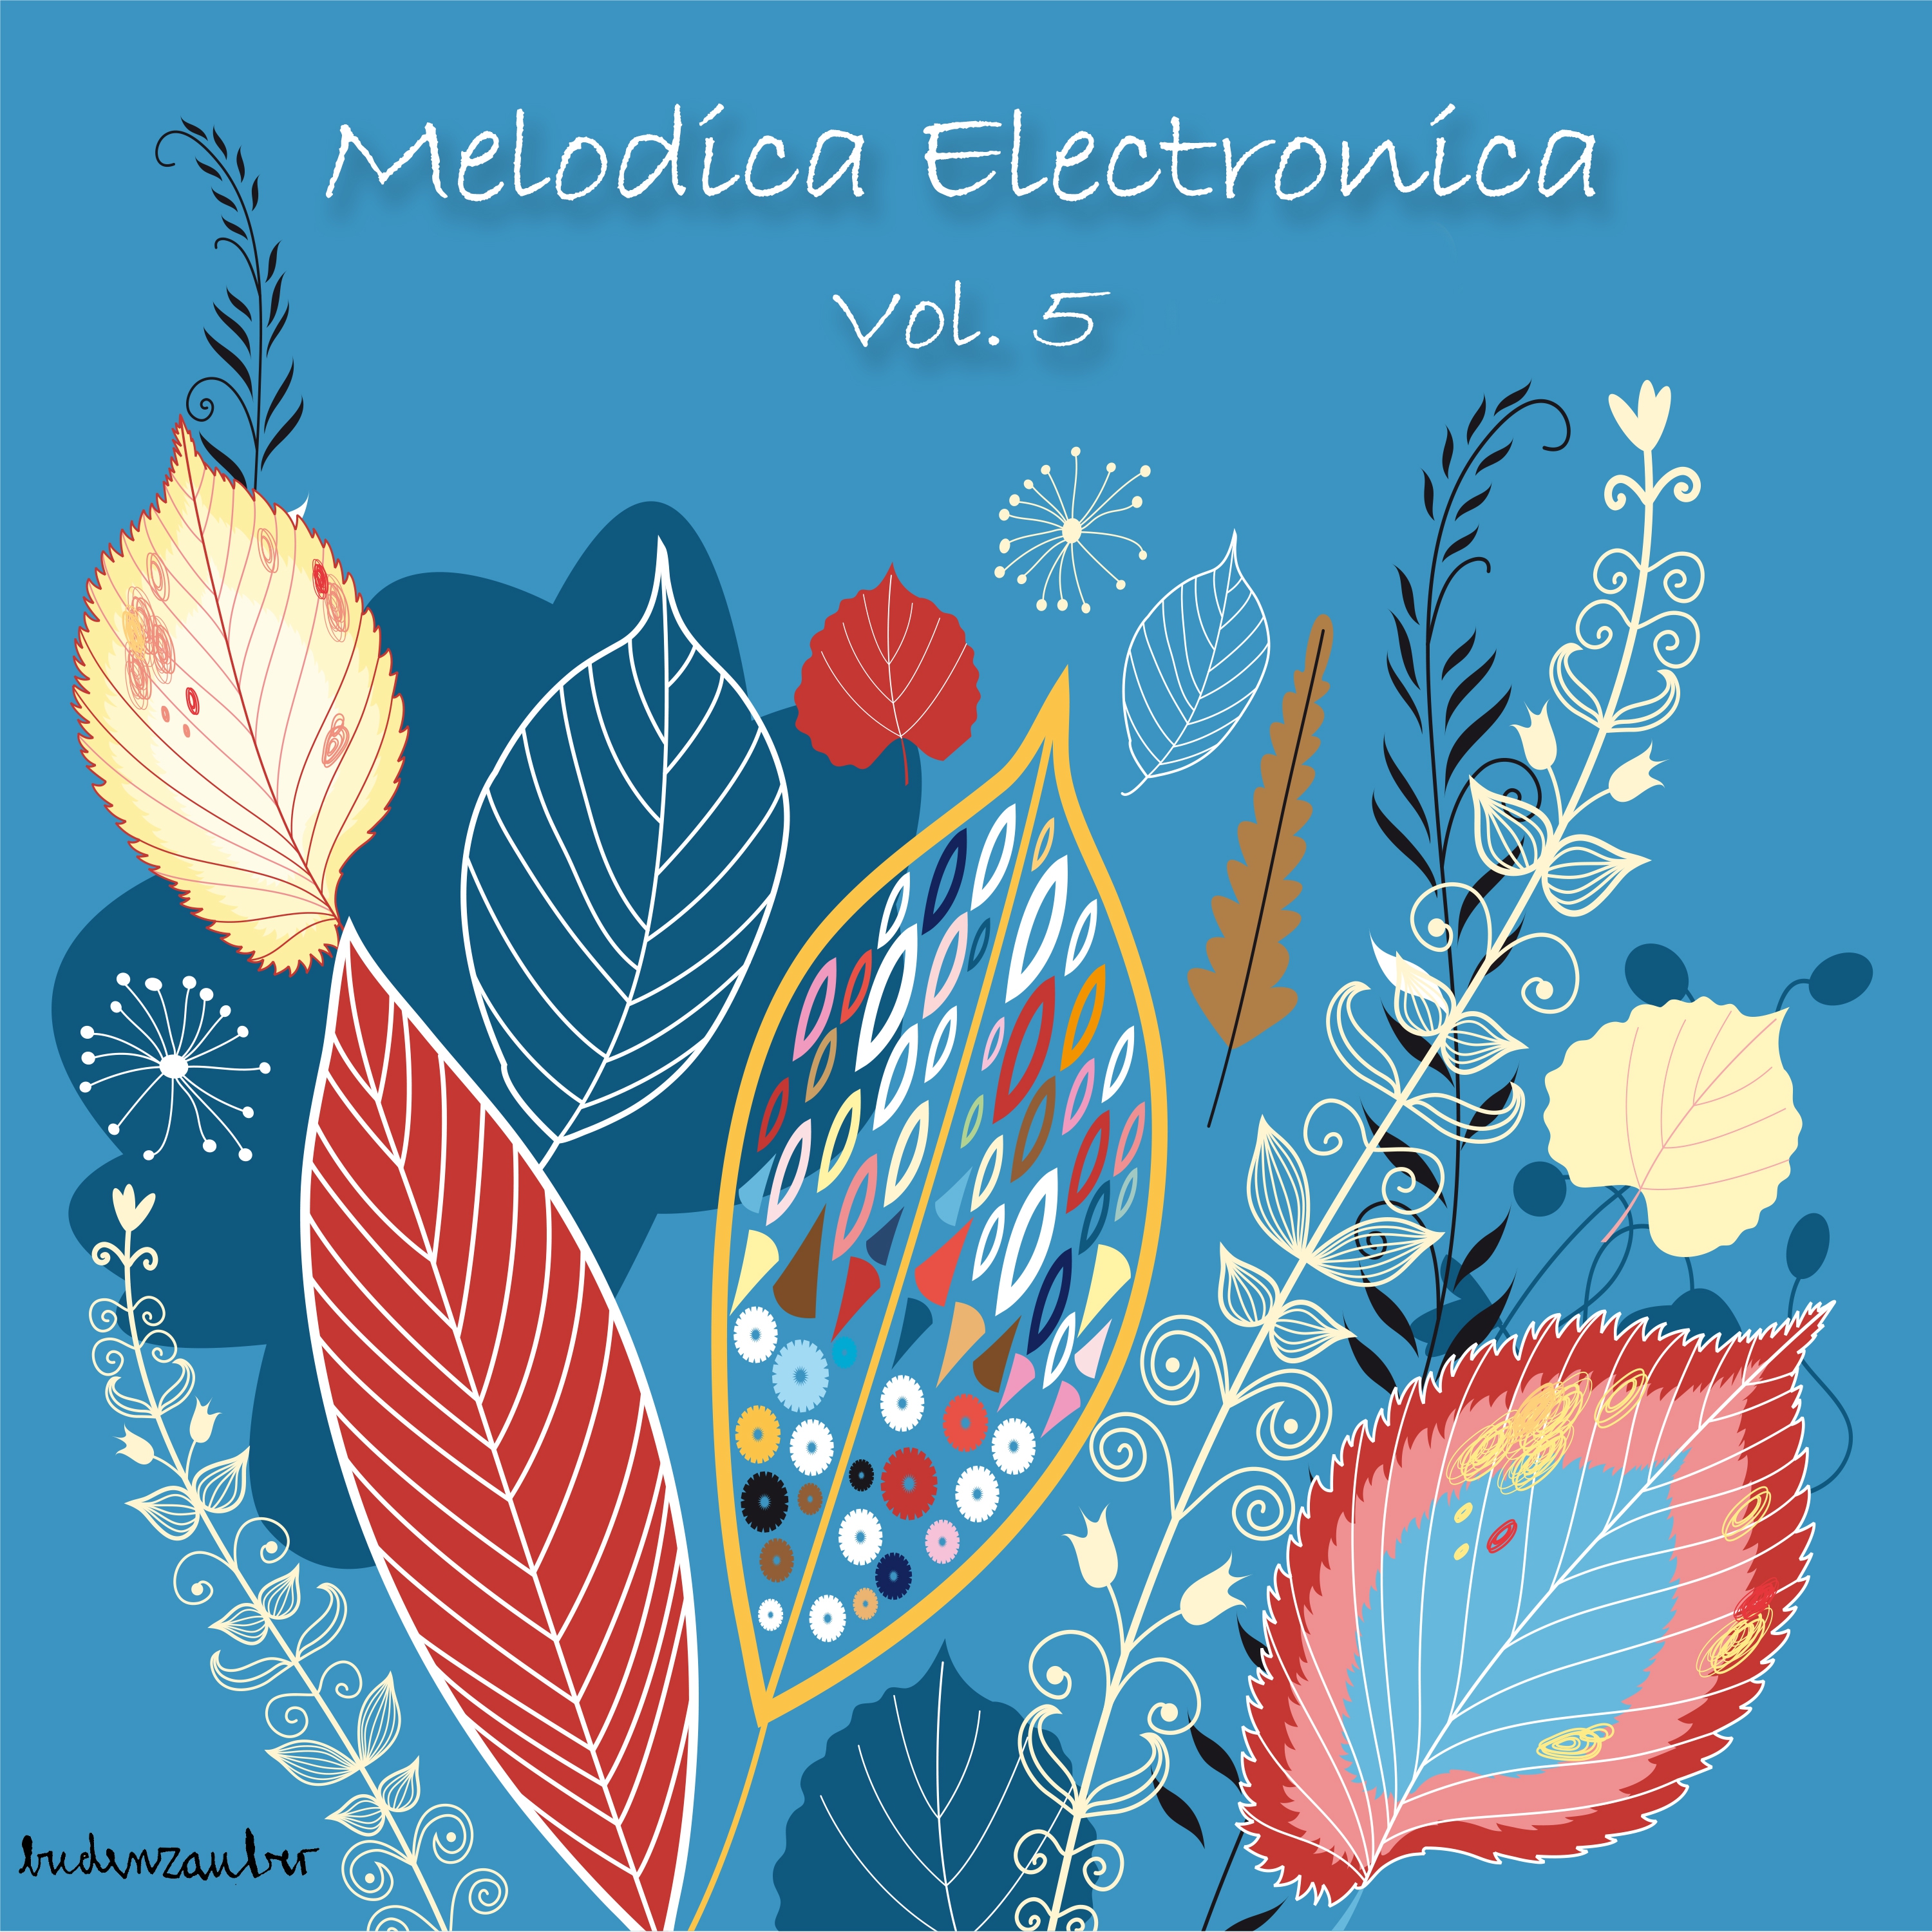 Melodica Electronica, Vol. 5